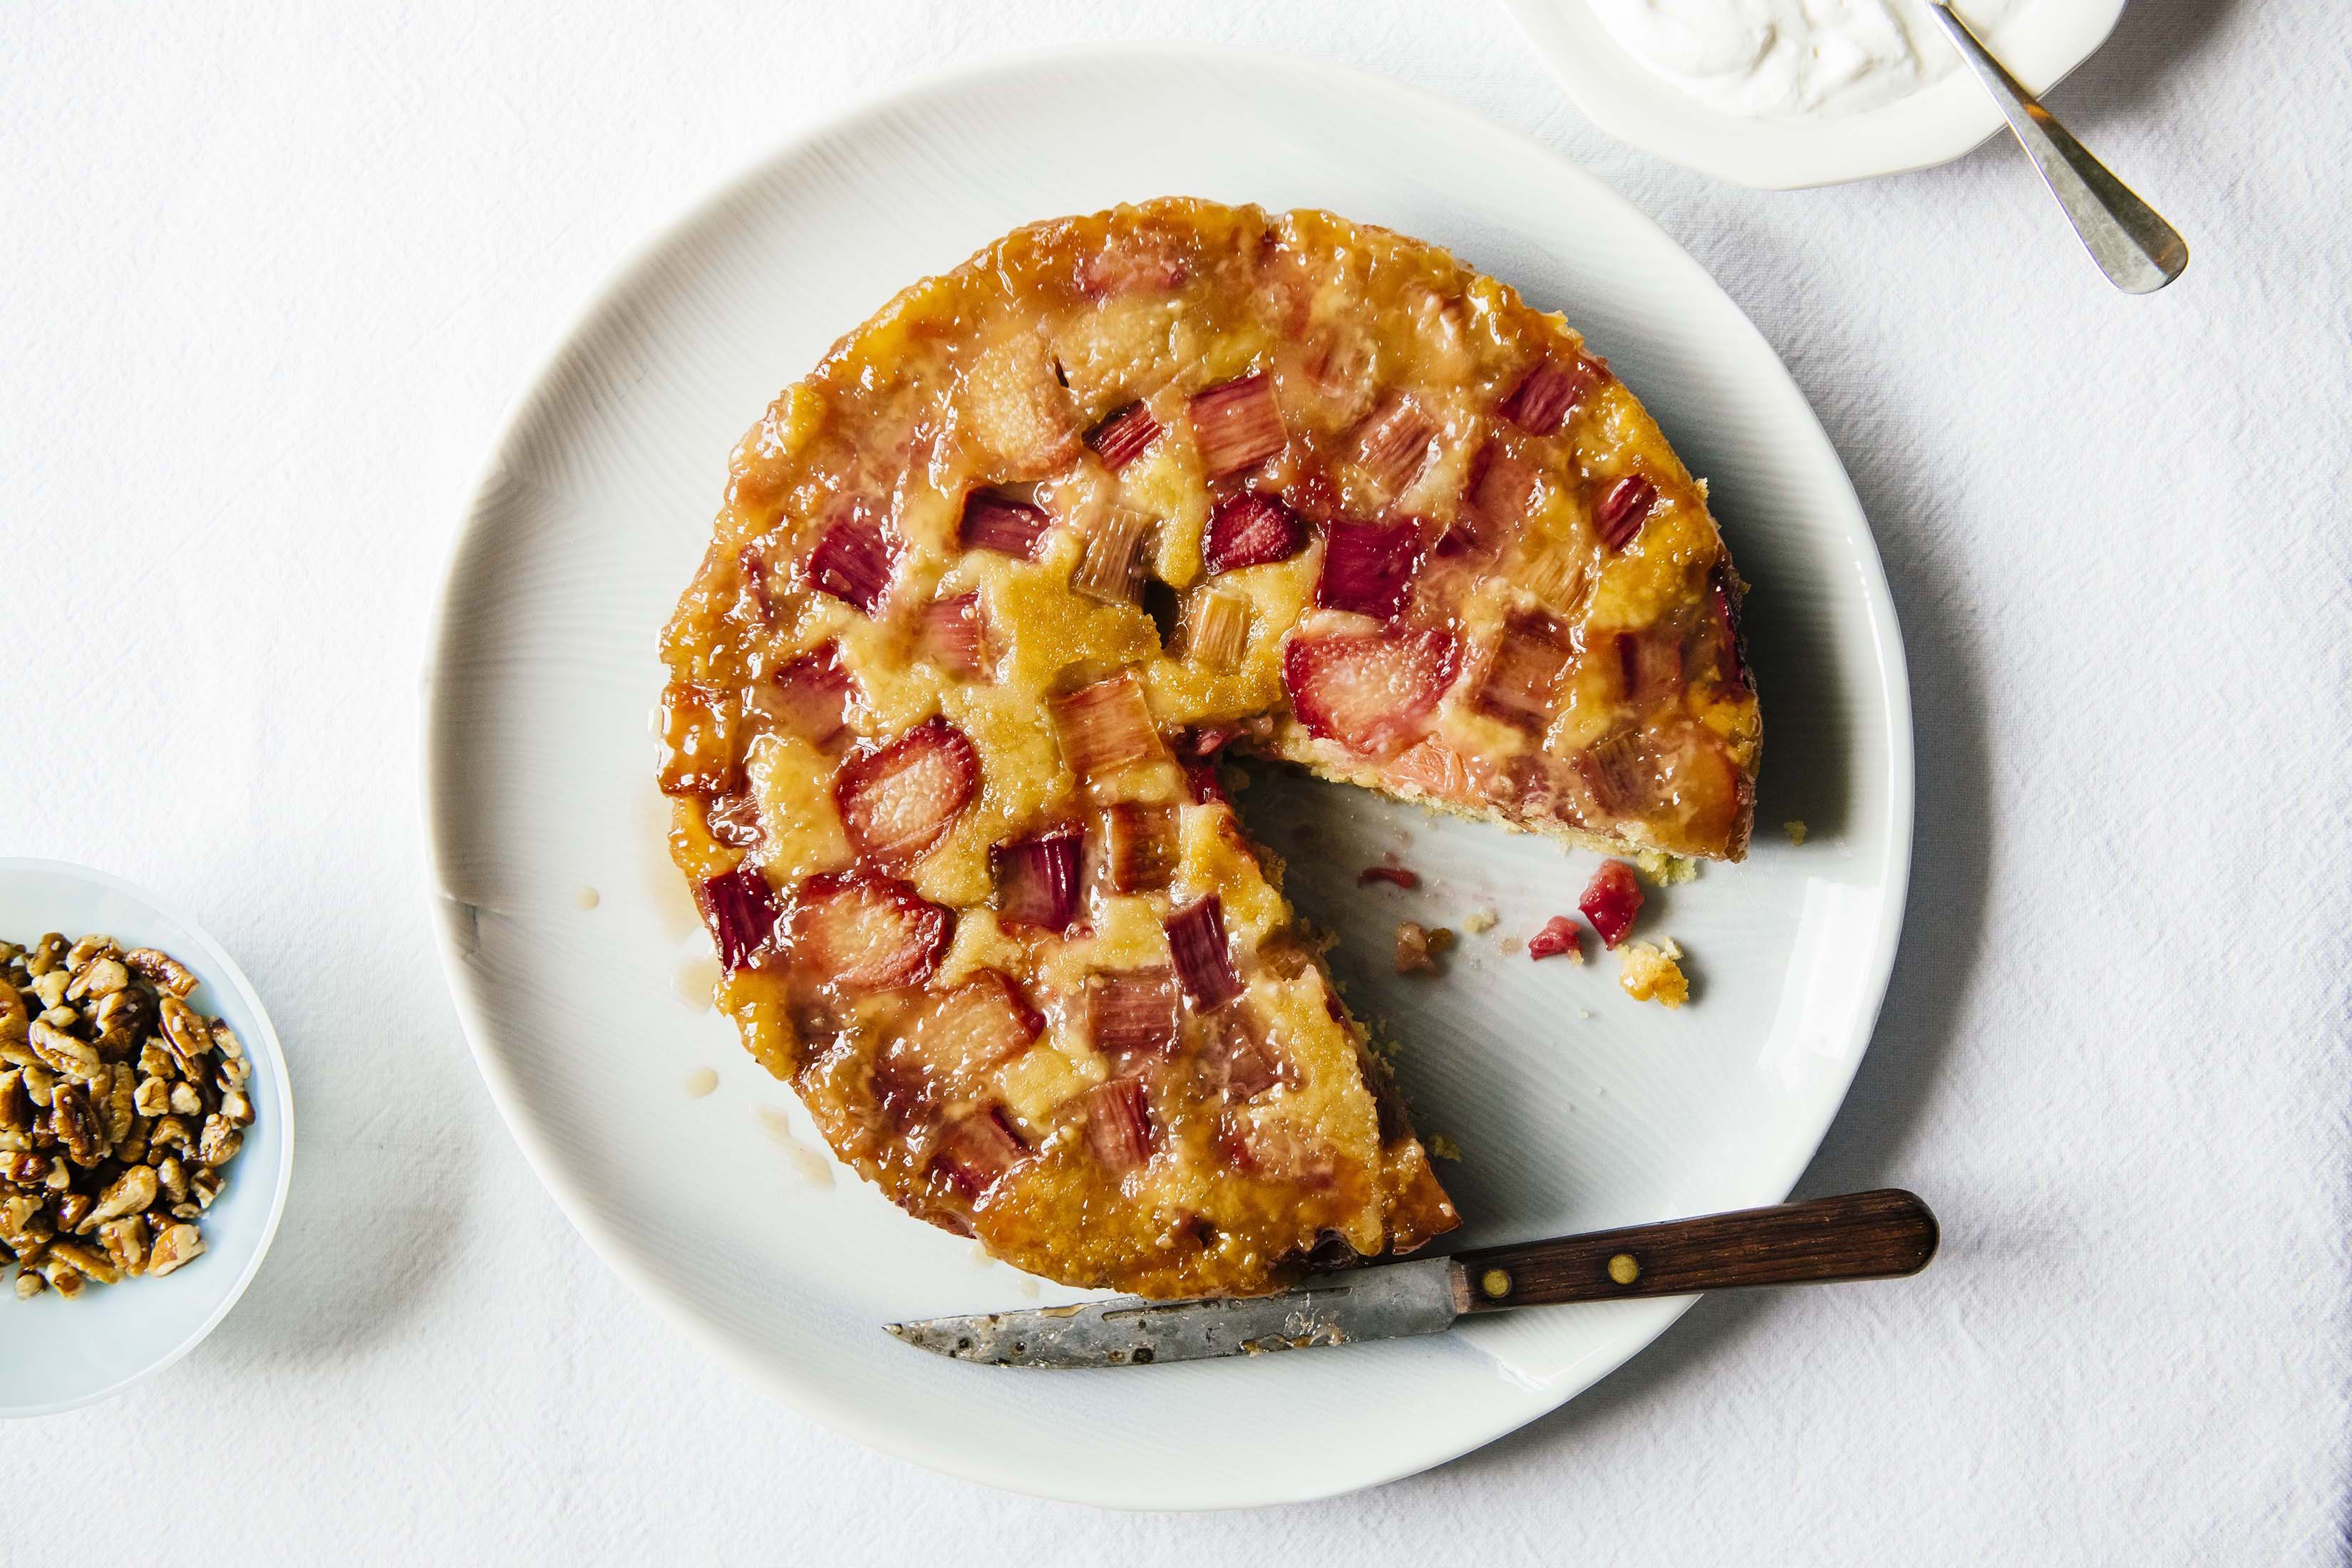 rhubarb upside-down cake by abra berens, as featured in 'Pulp: A Practical Guide to Cooking with Fruit'